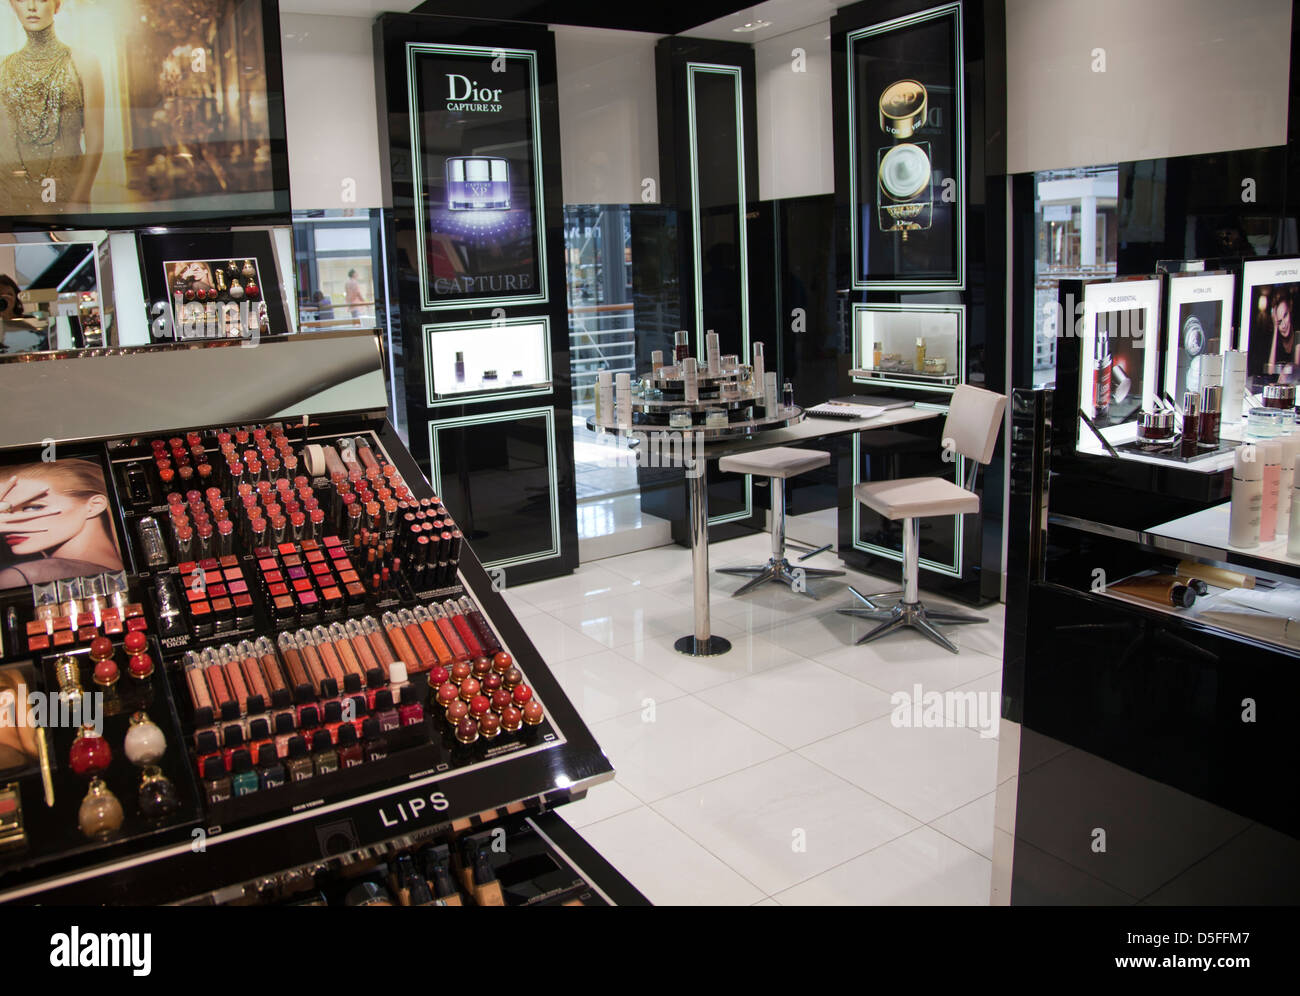 Dior Cosmetics Concession in Edgars at 